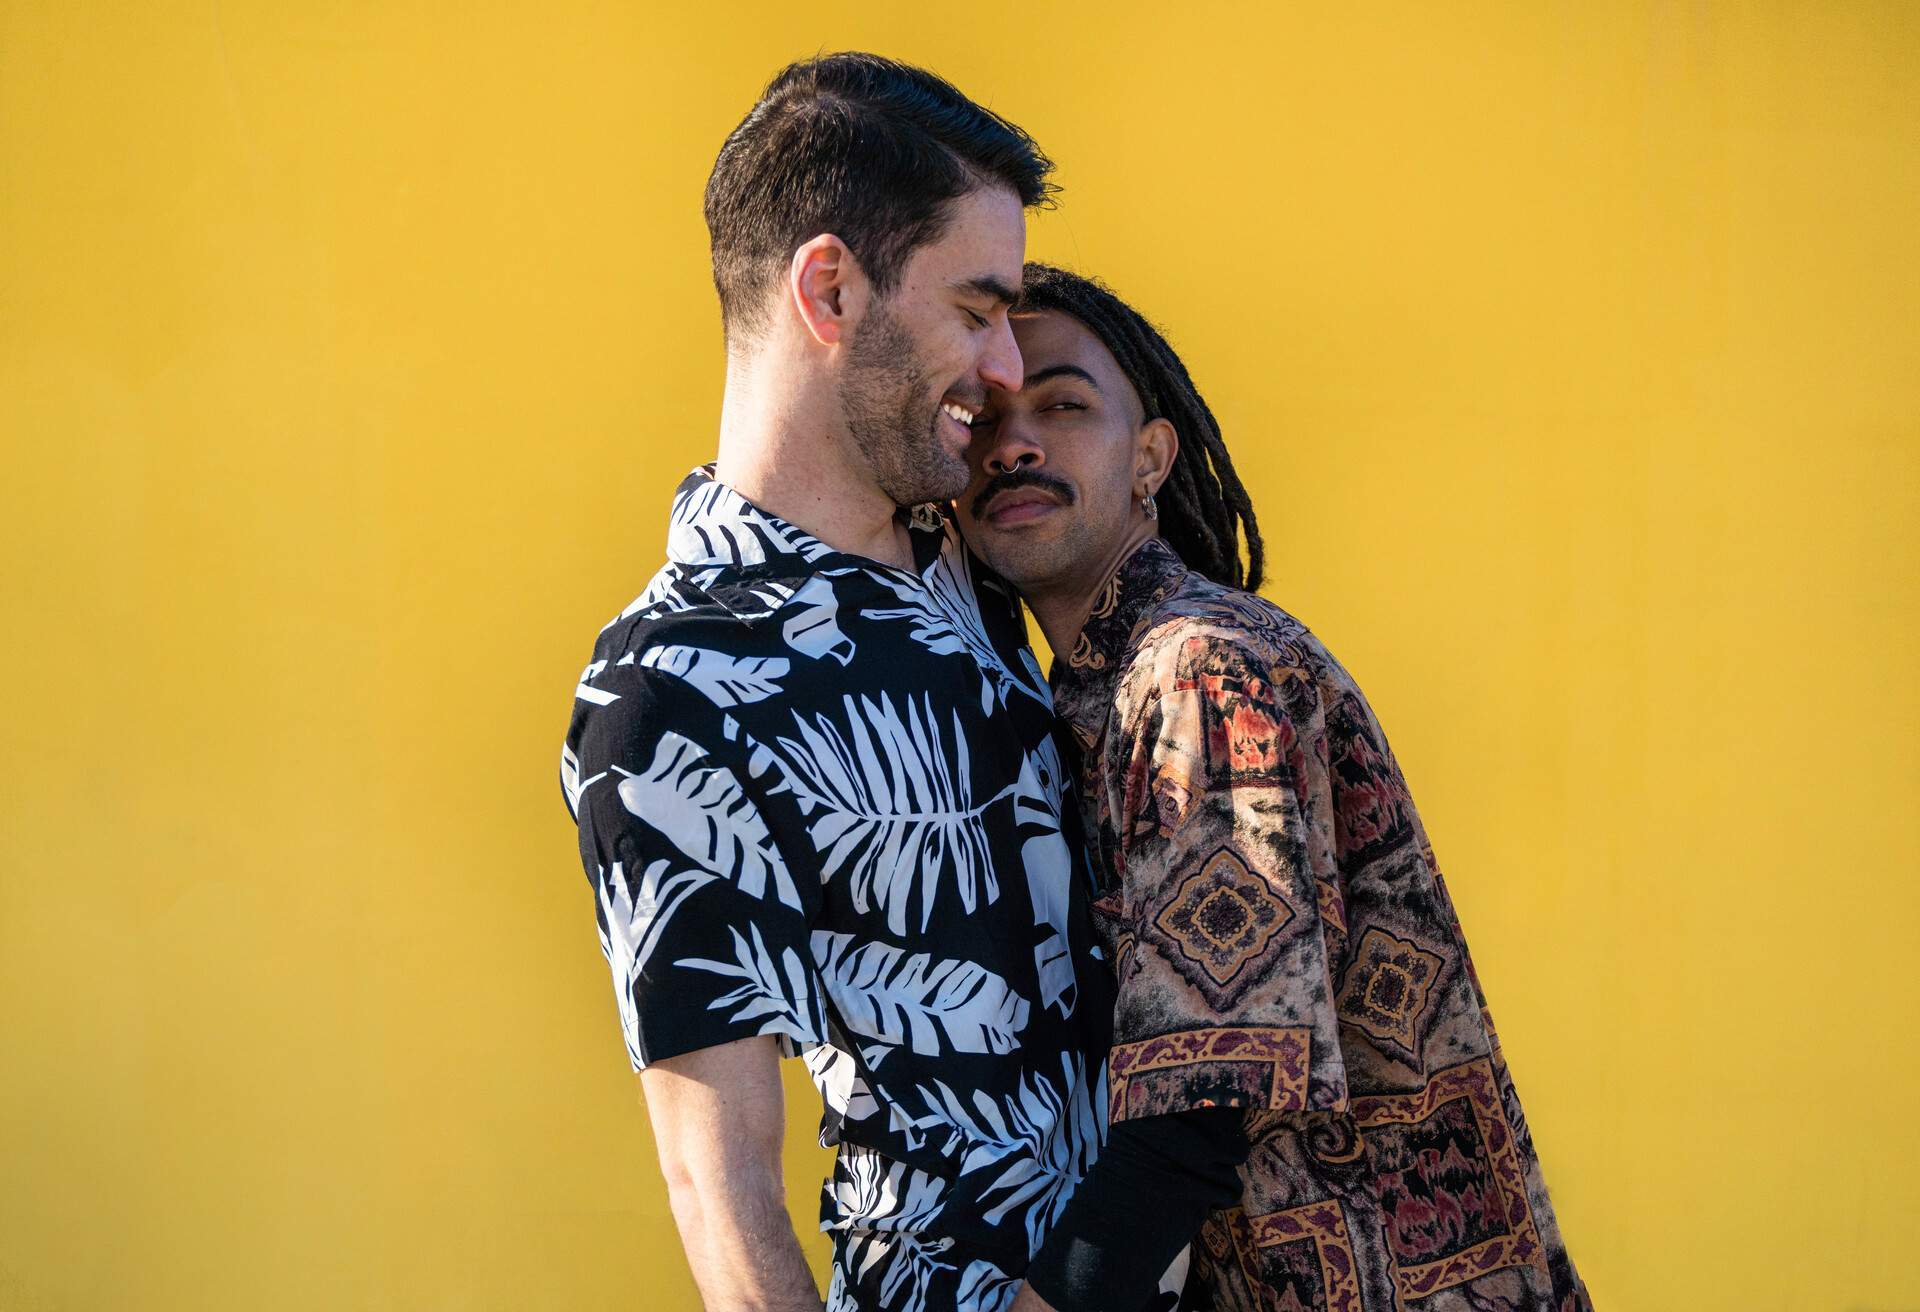 Two male lovers in printed shirts embrace against a yellow backdrop.